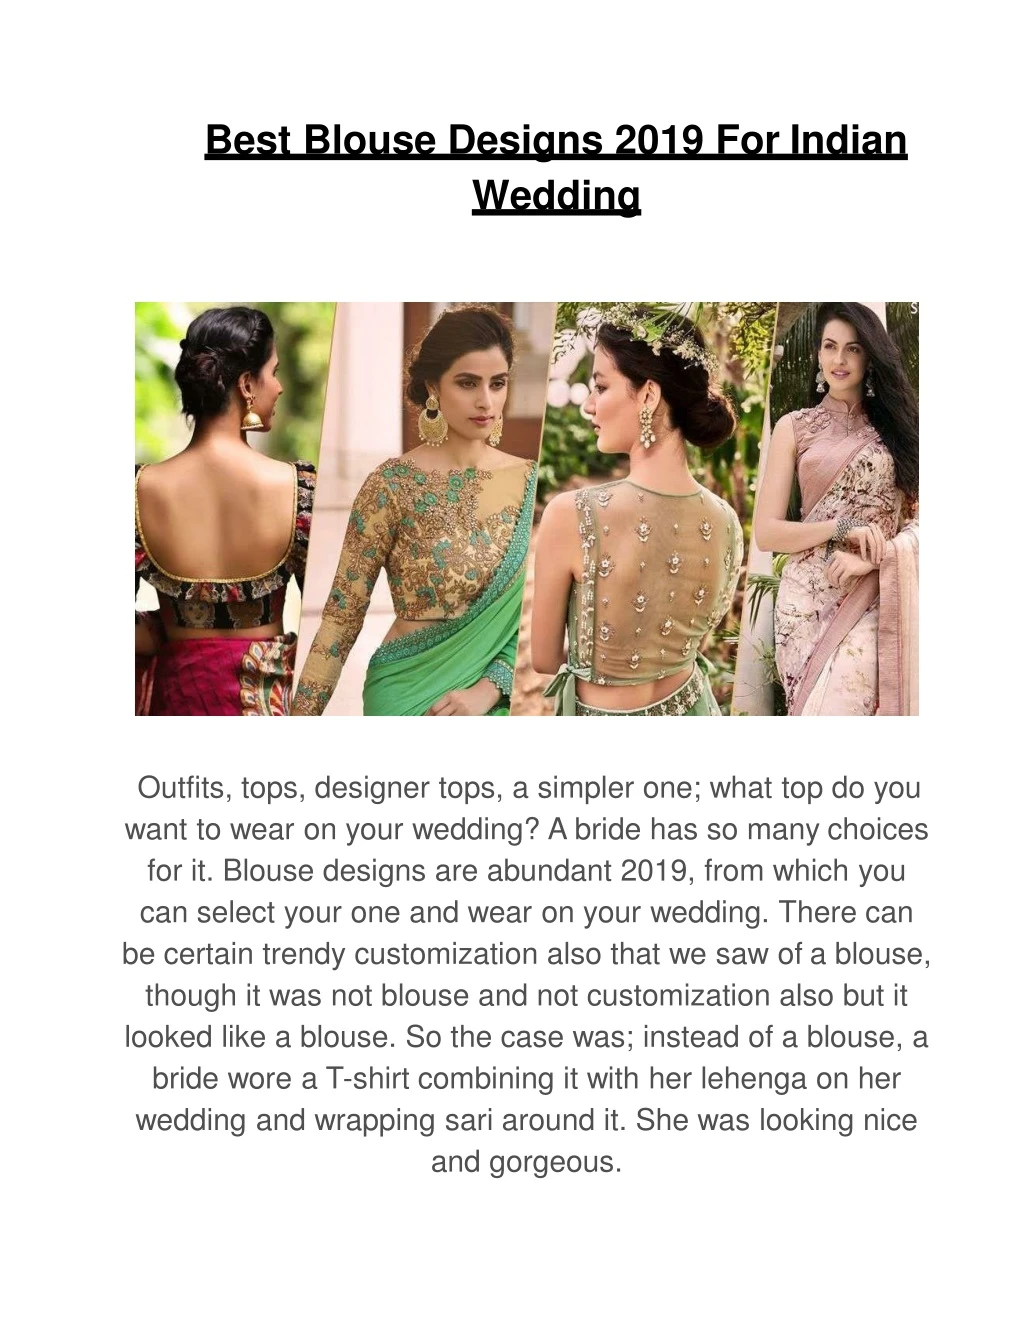 PPT - Best Blouse Designs 2019 For Indian Wedding PowerPoint ...